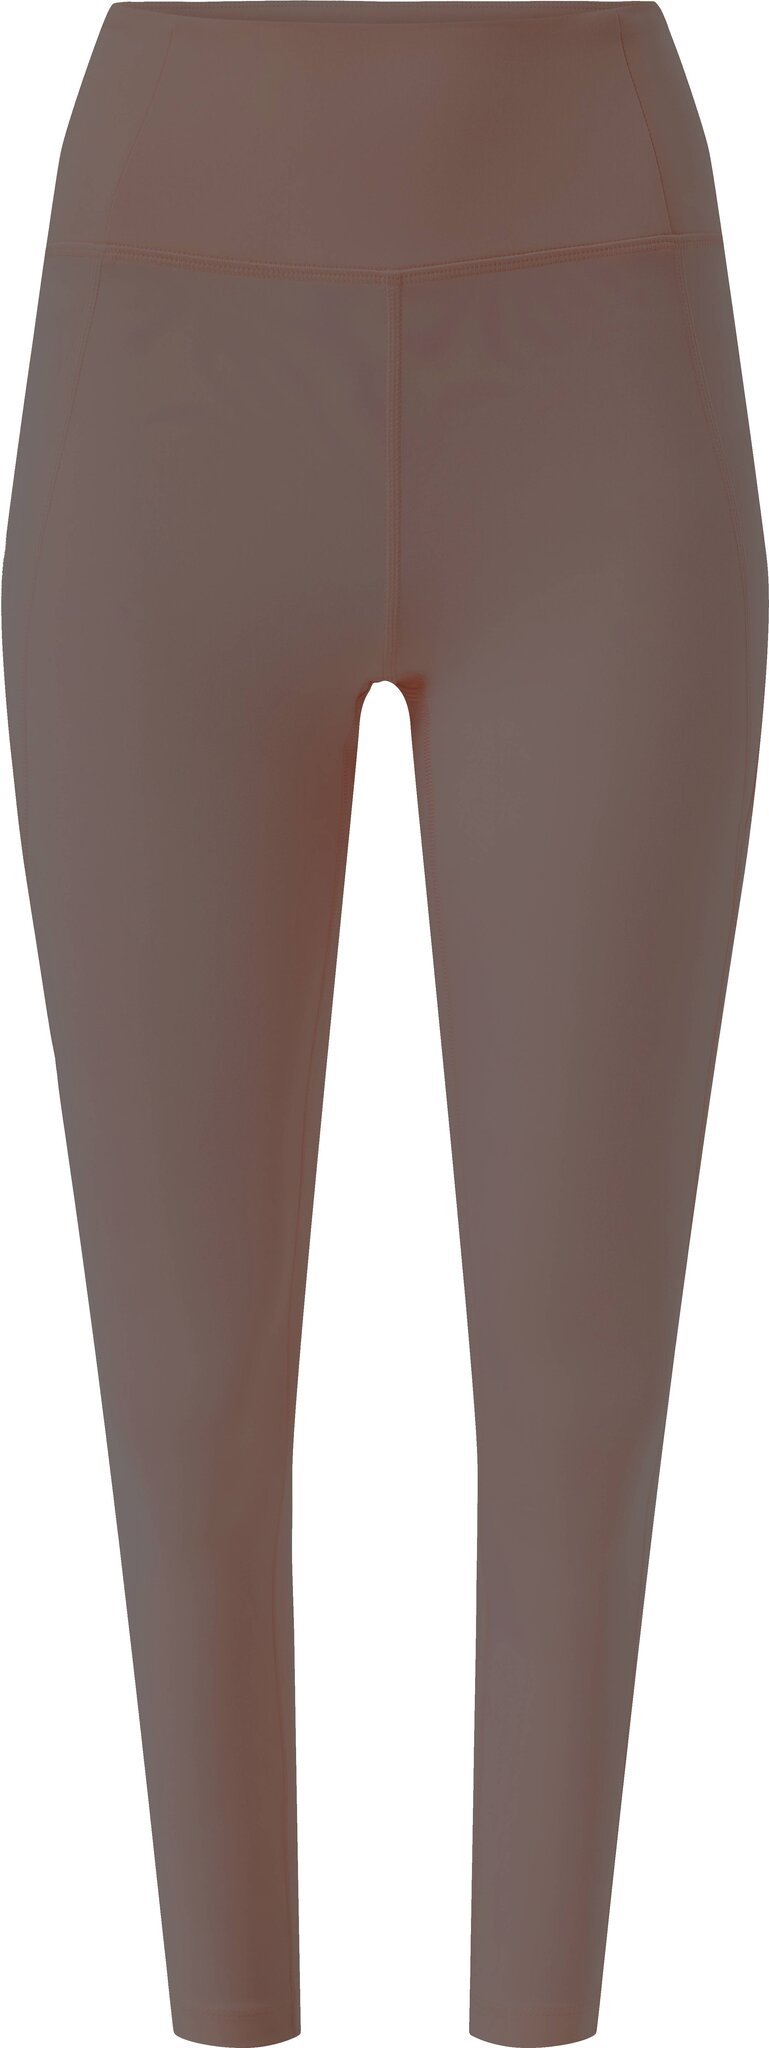 GIRLFRIEND COLLECTIVE Compressive stretch recycled leggings